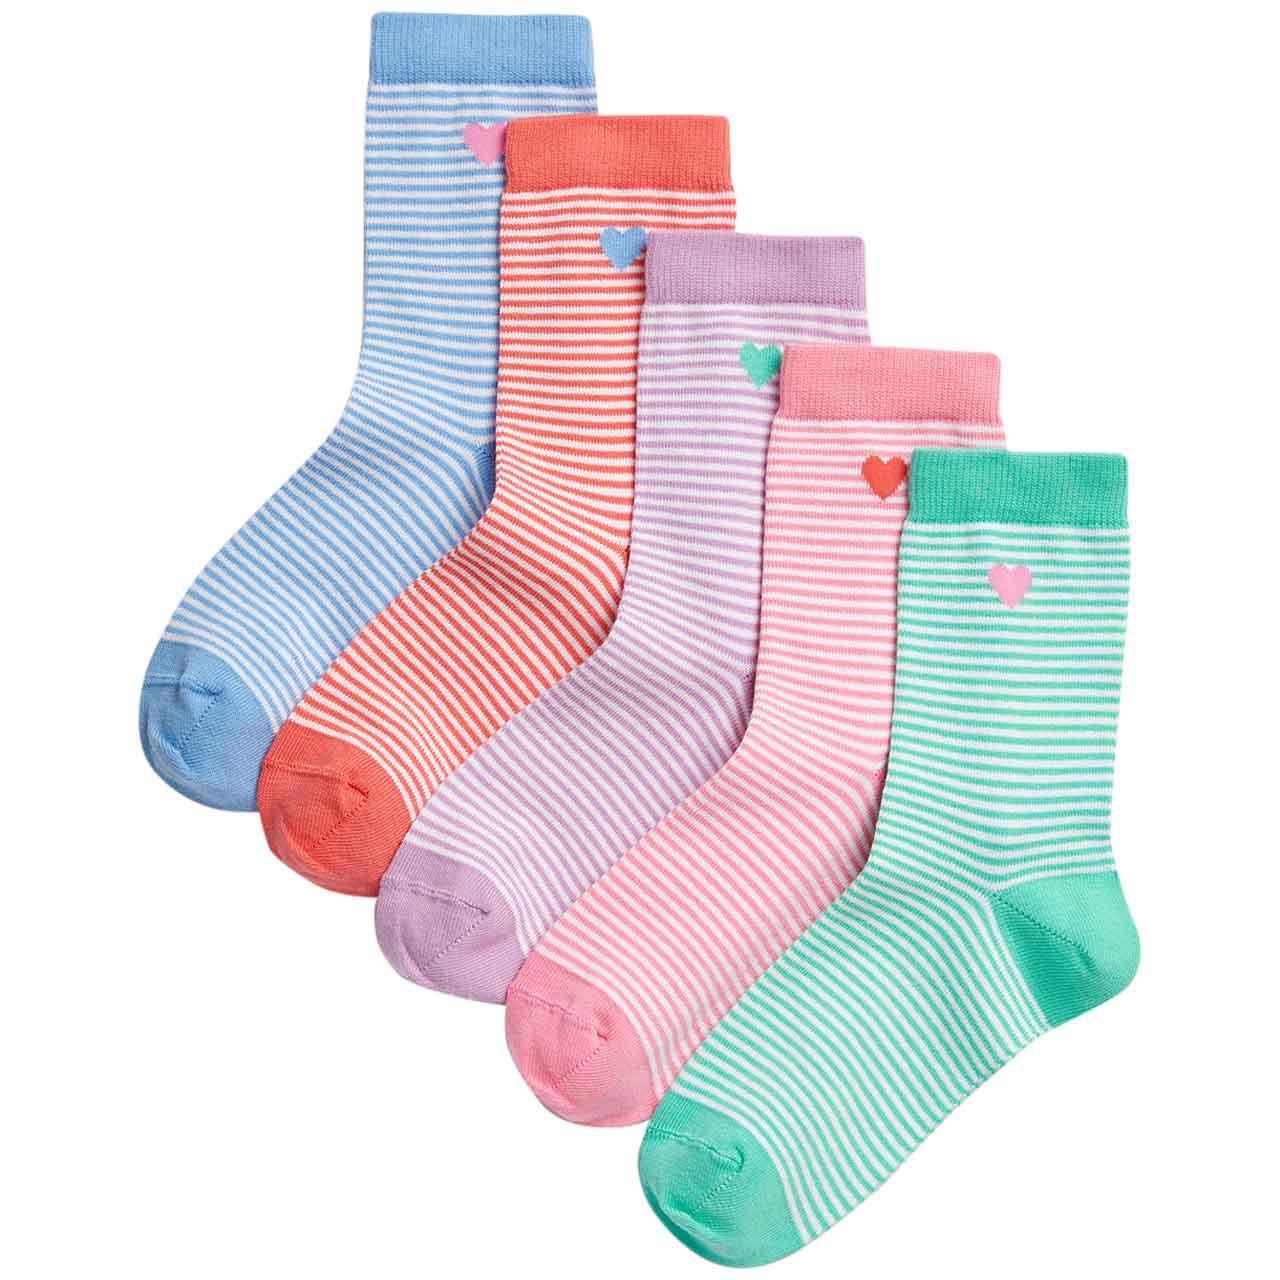 M&S Girls Cotton Rich Striped Socks, 12.5-3.5 Large, 5 Pack